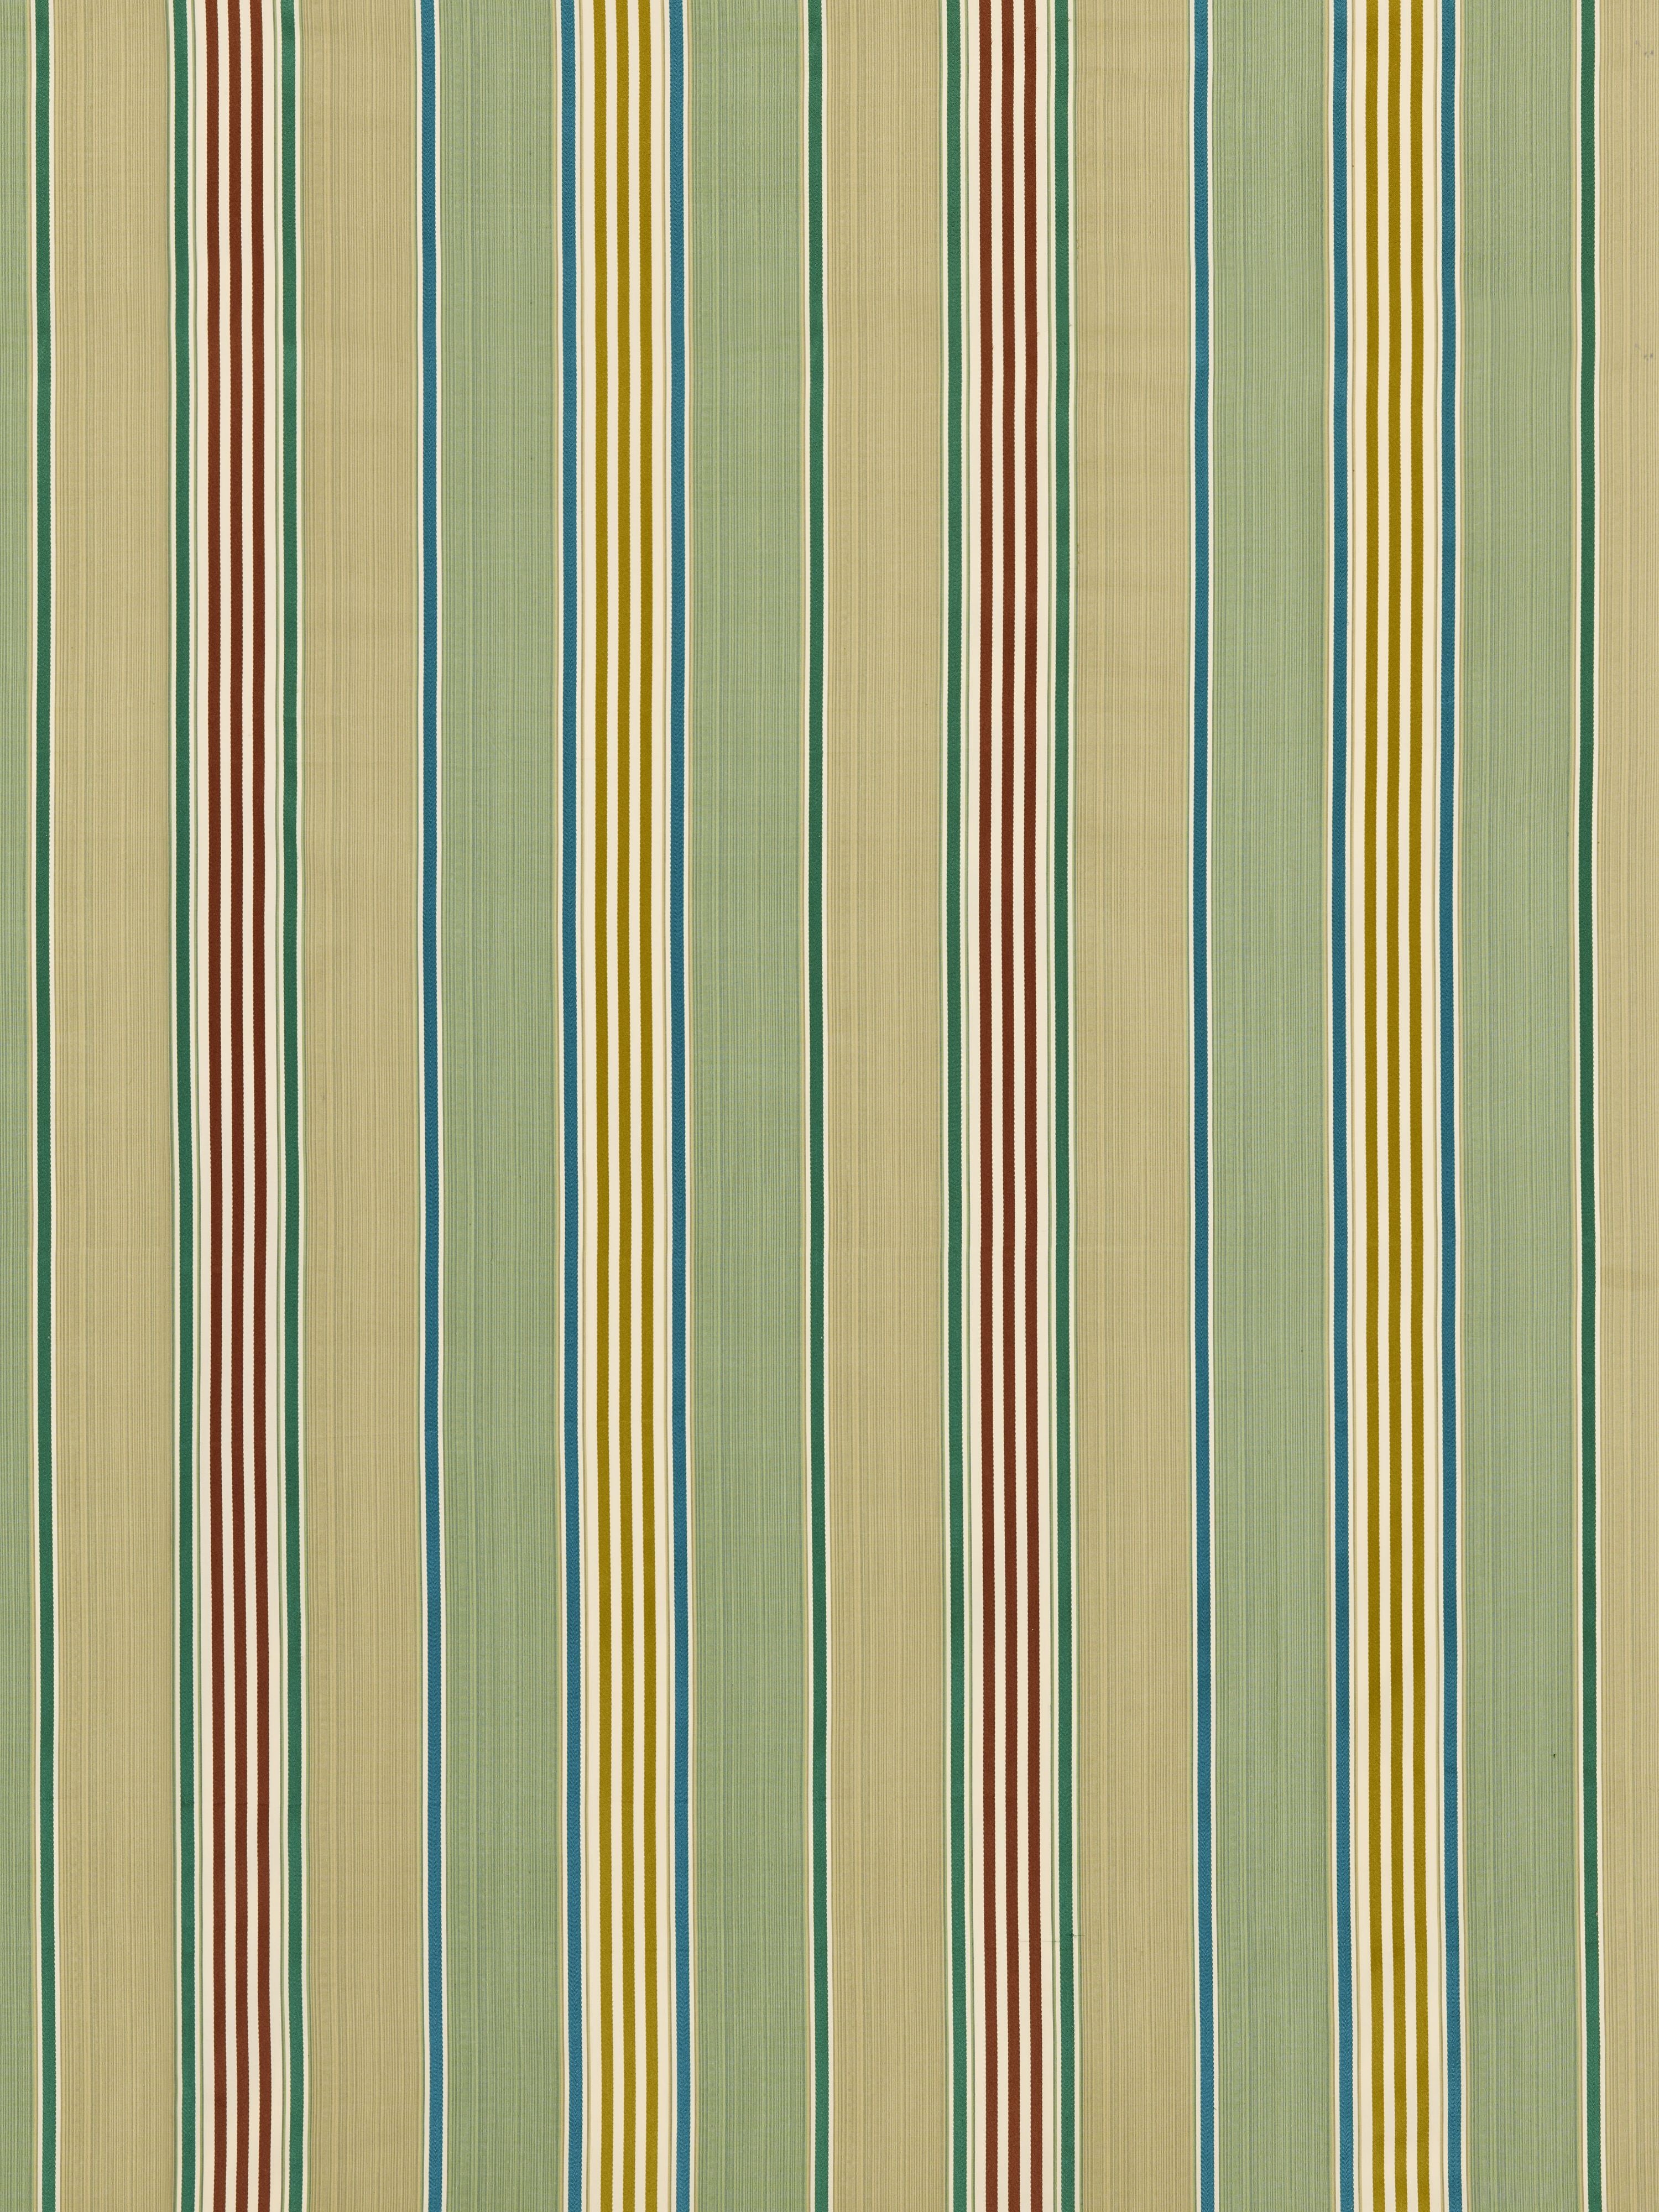 Charlotte Stripe fabric in moss color - pattern number ND 00016130 - by Scalamandre in the Old World Weavers collection